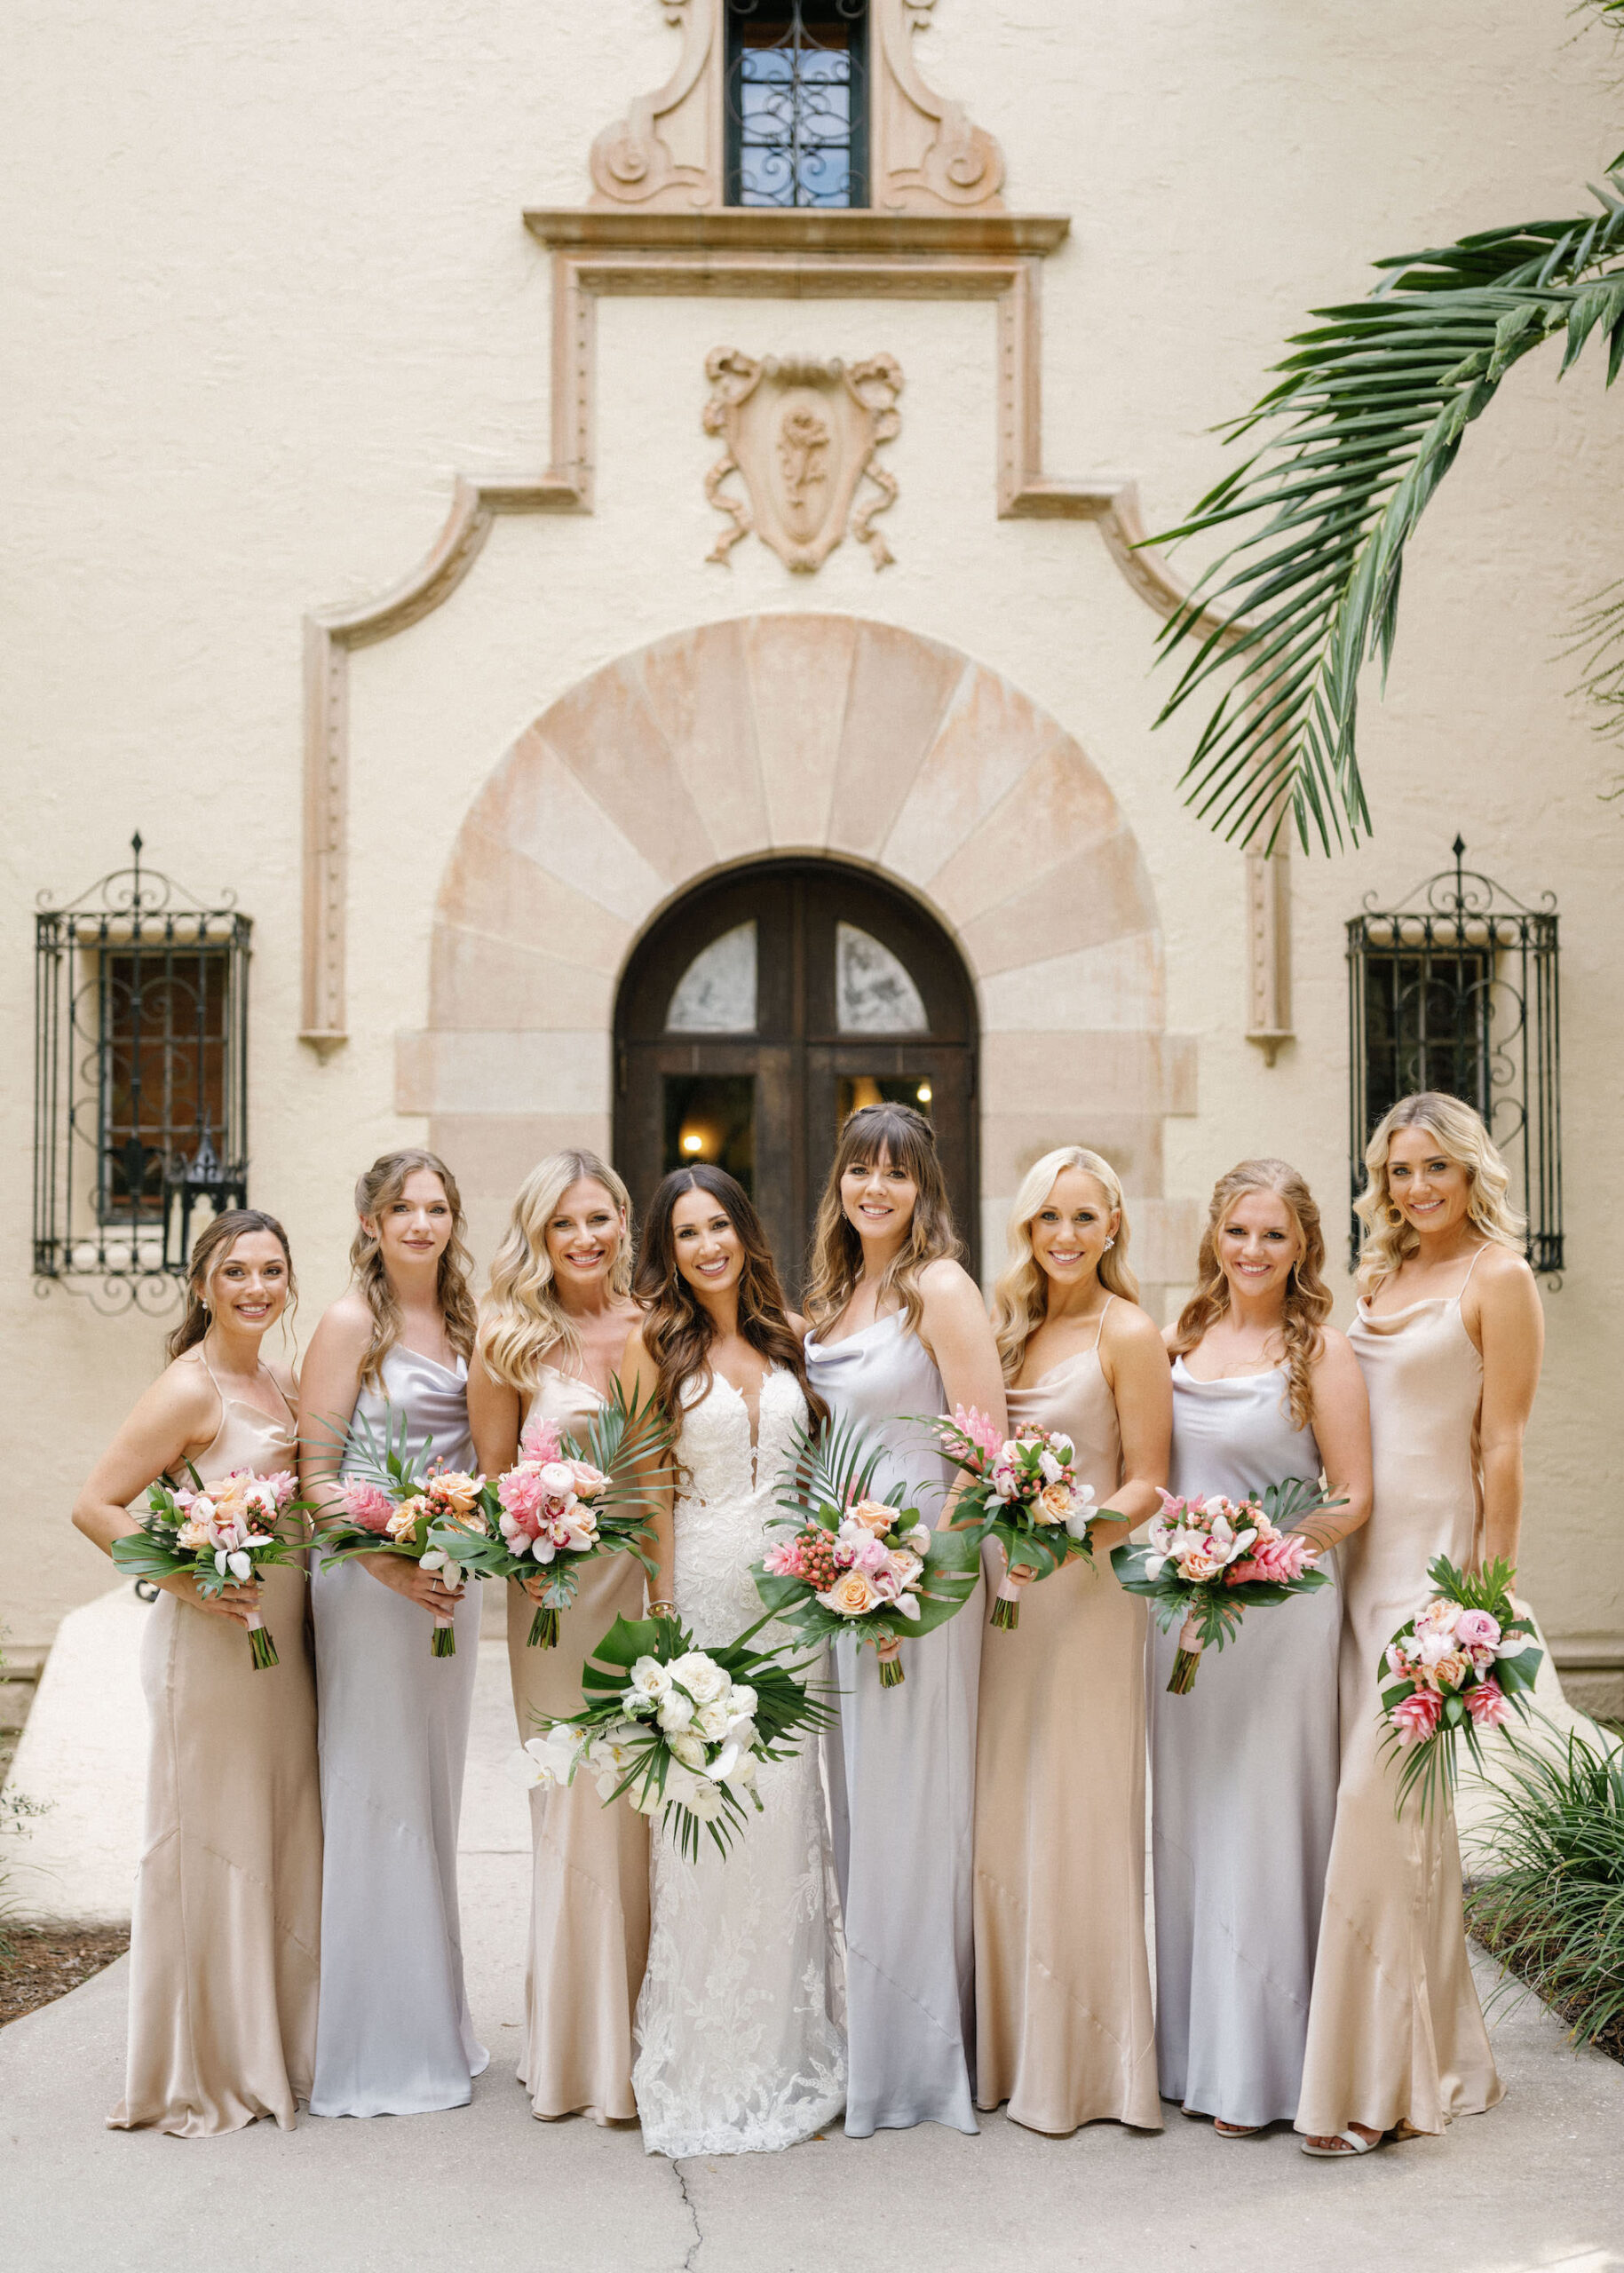 Luxurious Classic Wedding, Bridesmaids Wearing Matching Champagne and Silver Silk Dresses Holding Tropical Floral Bouquets | Tampa Bay Wedding Florist Botanica International Design Studio